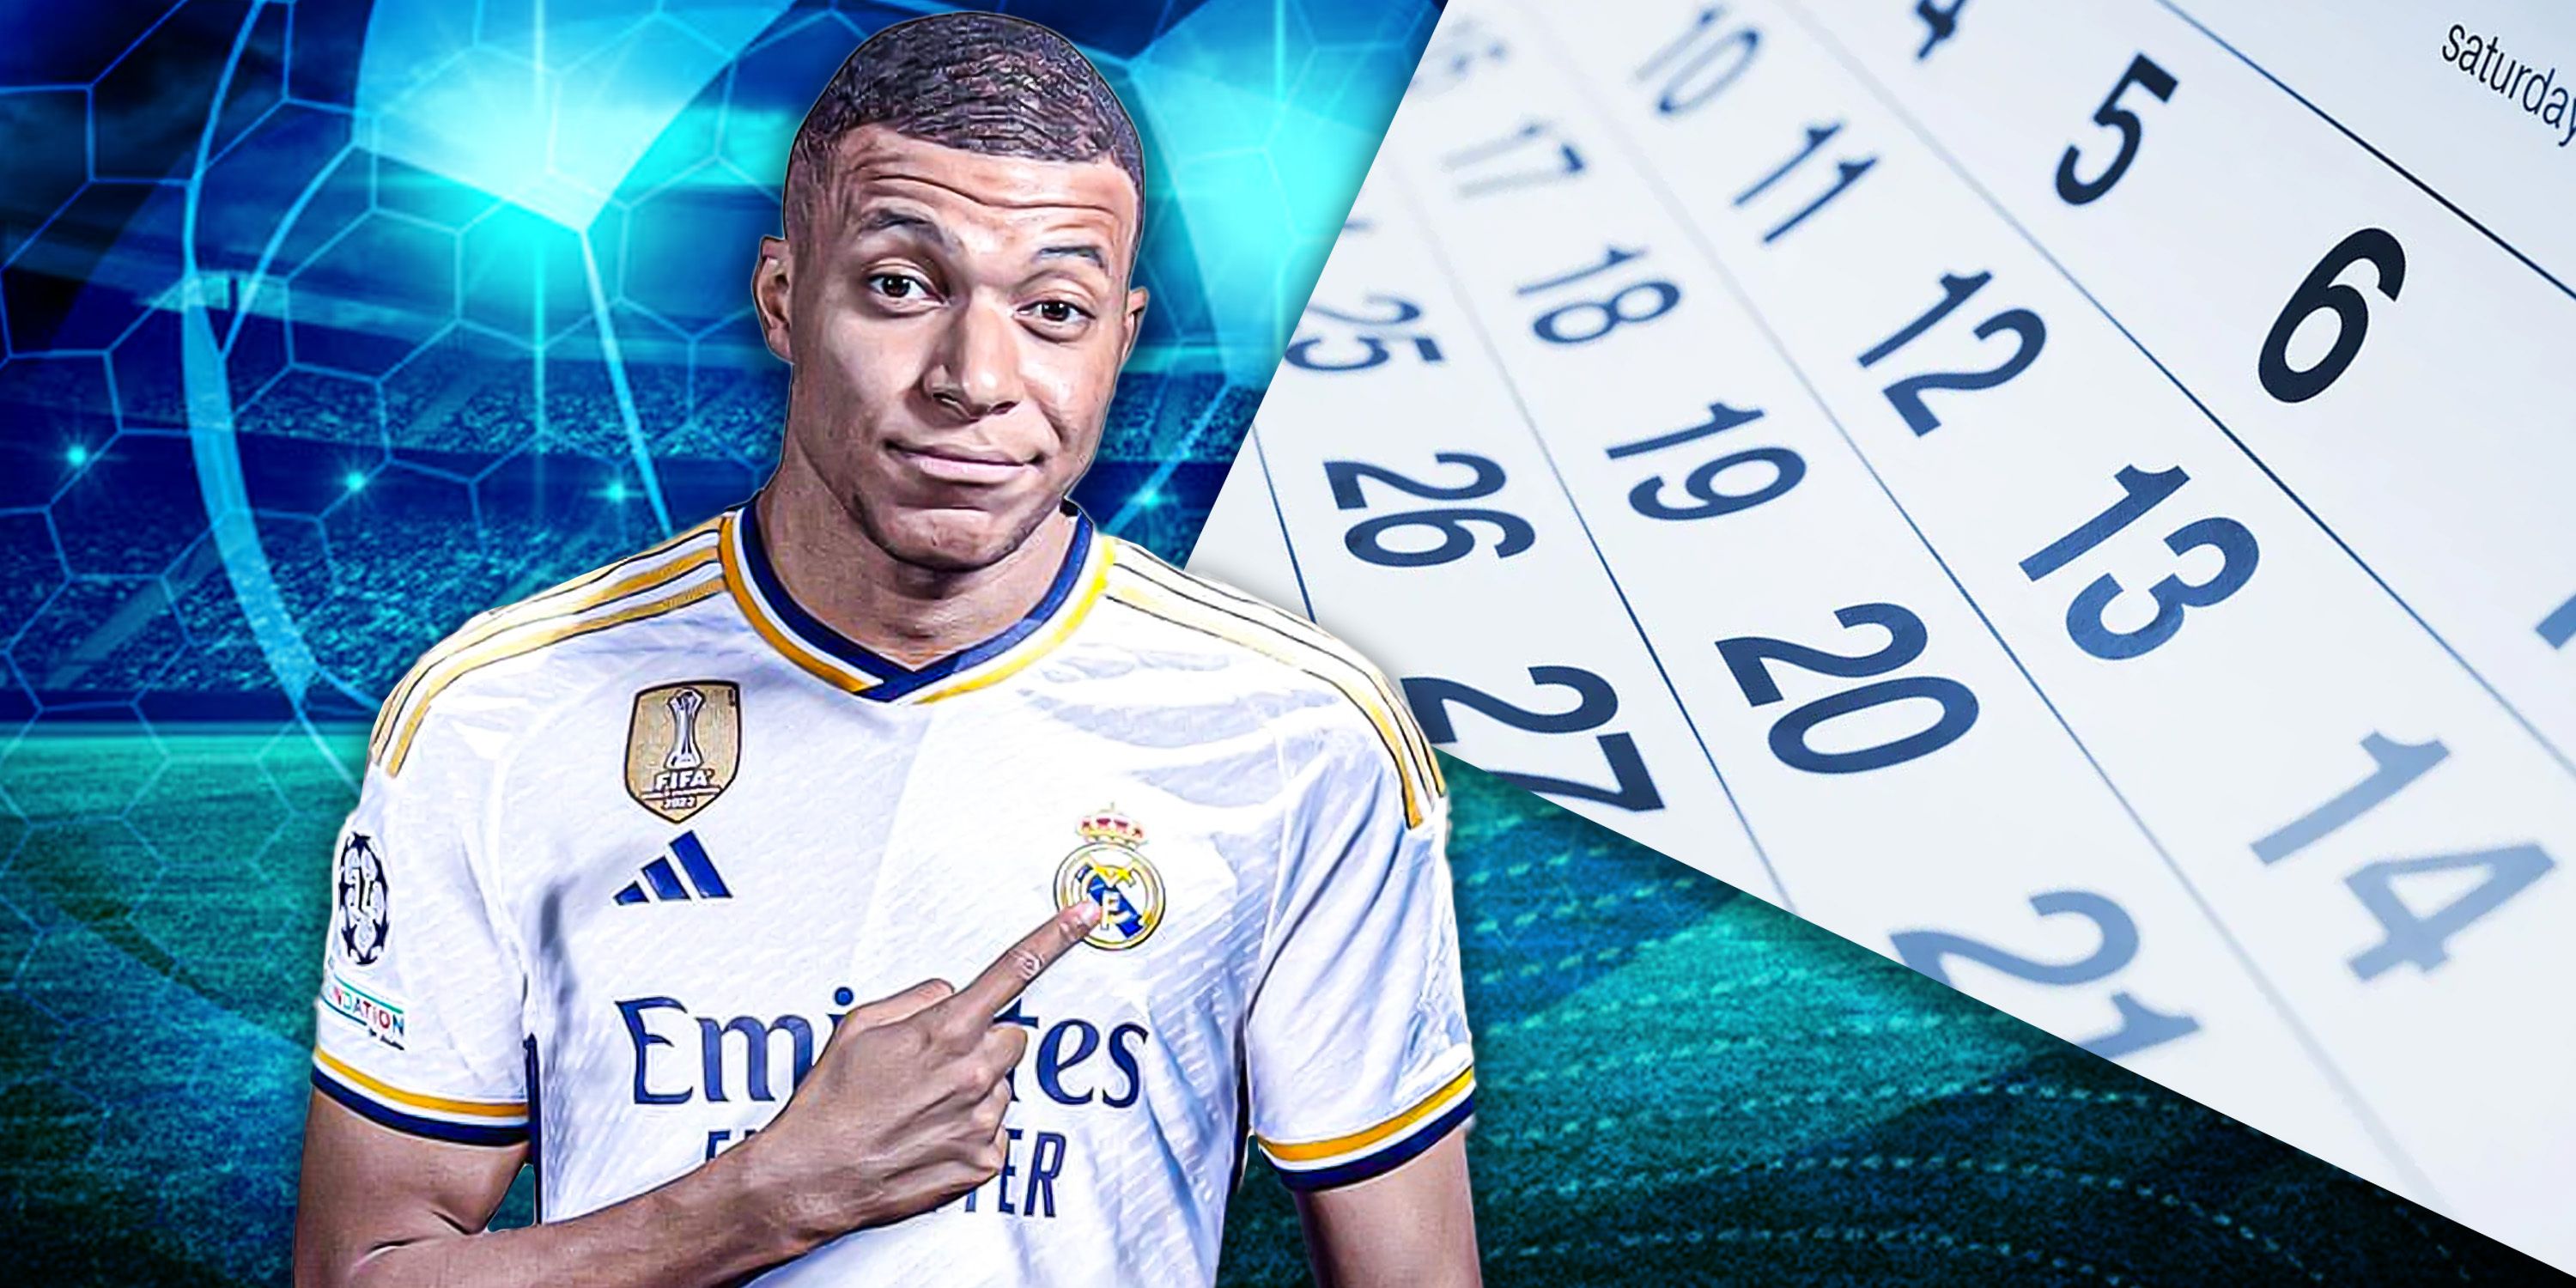 A custom image of Kylian Mbappe in a Real Madrid shirt in front of a calendar